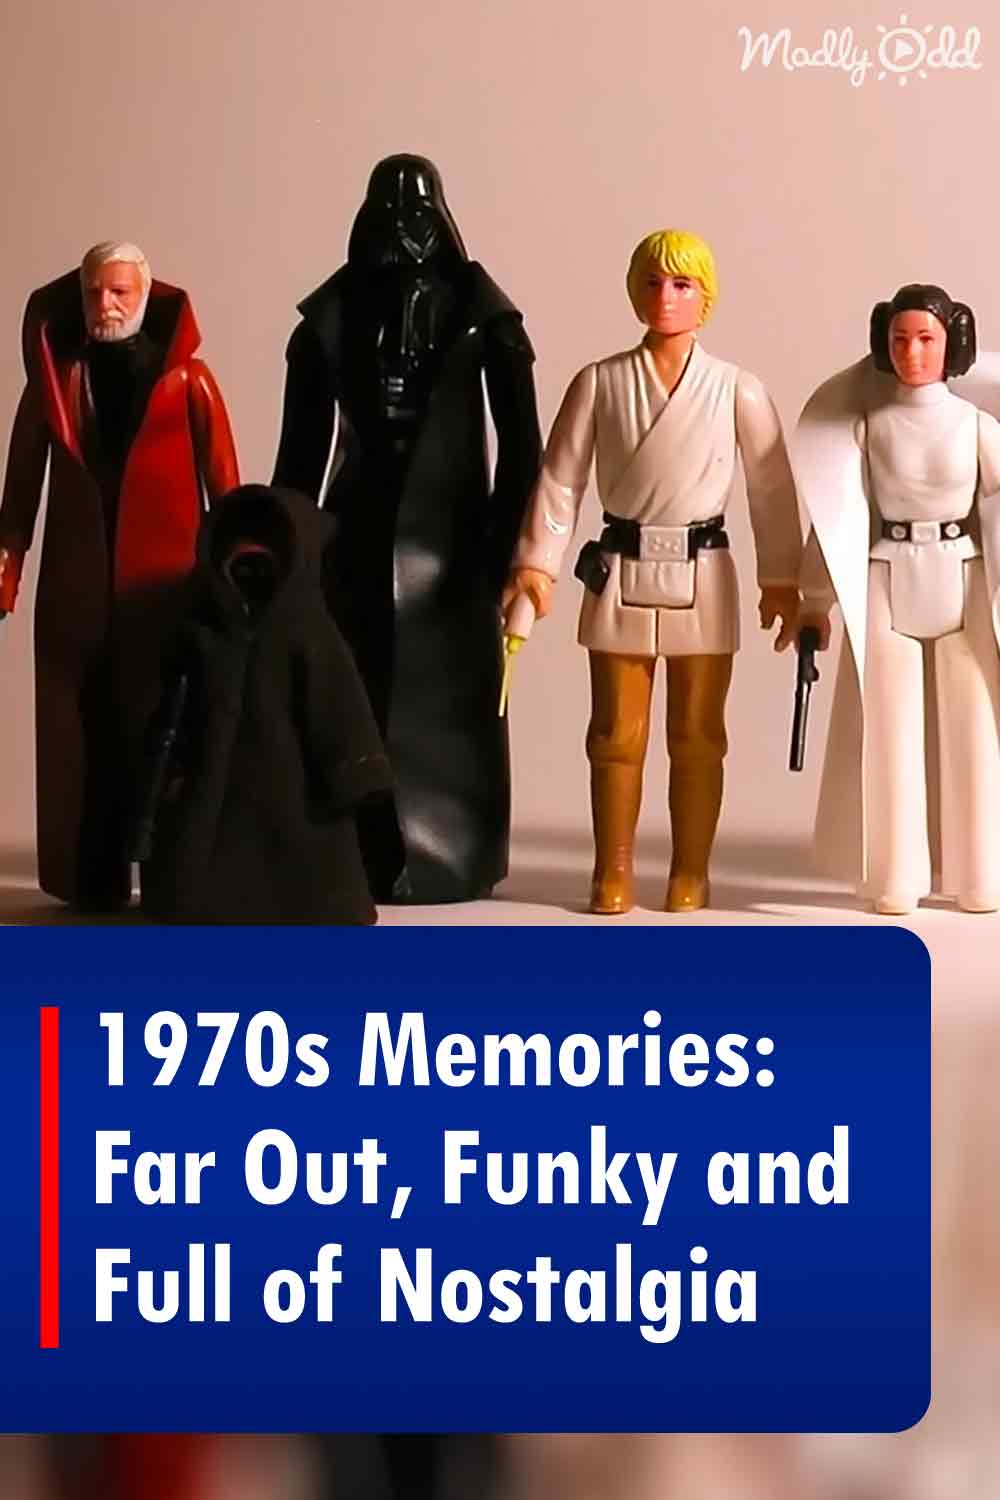 1970s Memories: Far Out, Funky and Full of Nostalgia